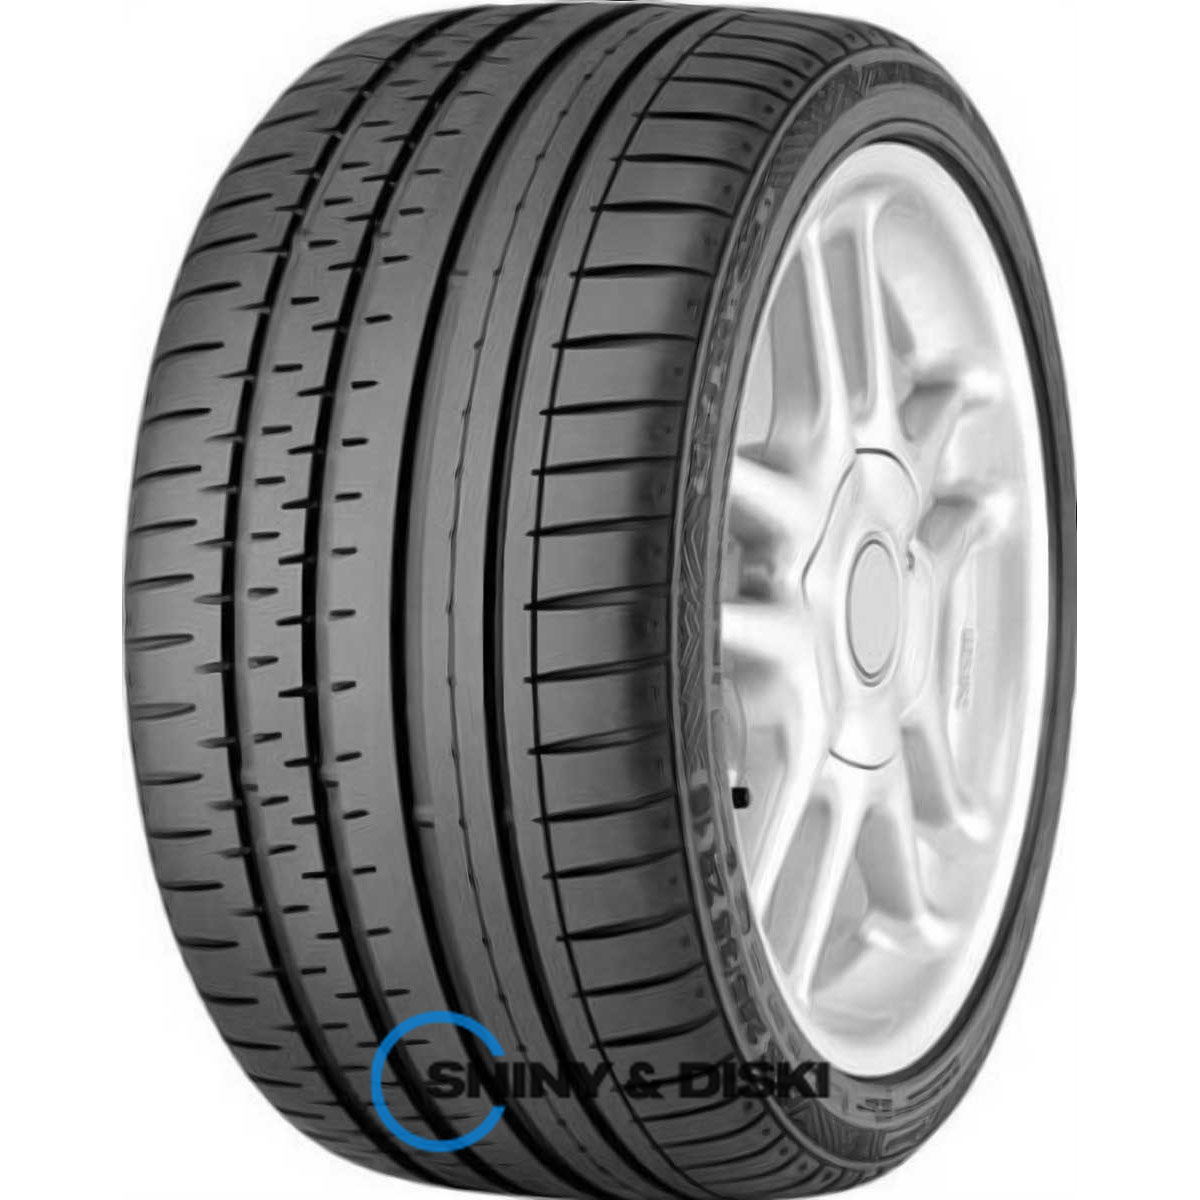 continental sportcontact 2 255/35 r20 97y mo